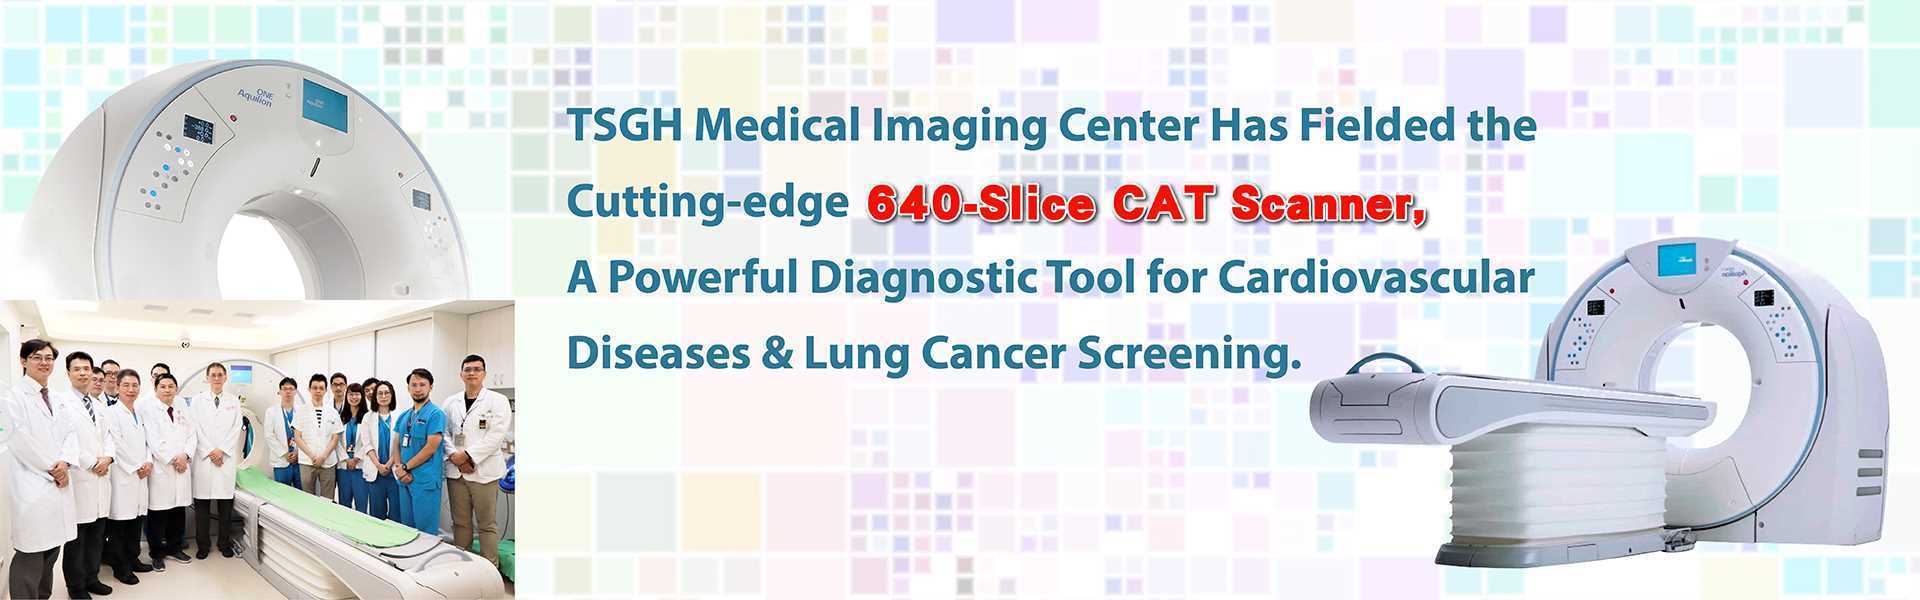 TSGH_Medical_Imaging_Center_has_fielded_the_Cutting-edge_640-Slice_CAT_Scanner-A_Powerful_Diagnostic_Tool_for_Cardiovascular_Diseases_&_Lung_Cancer_Screening